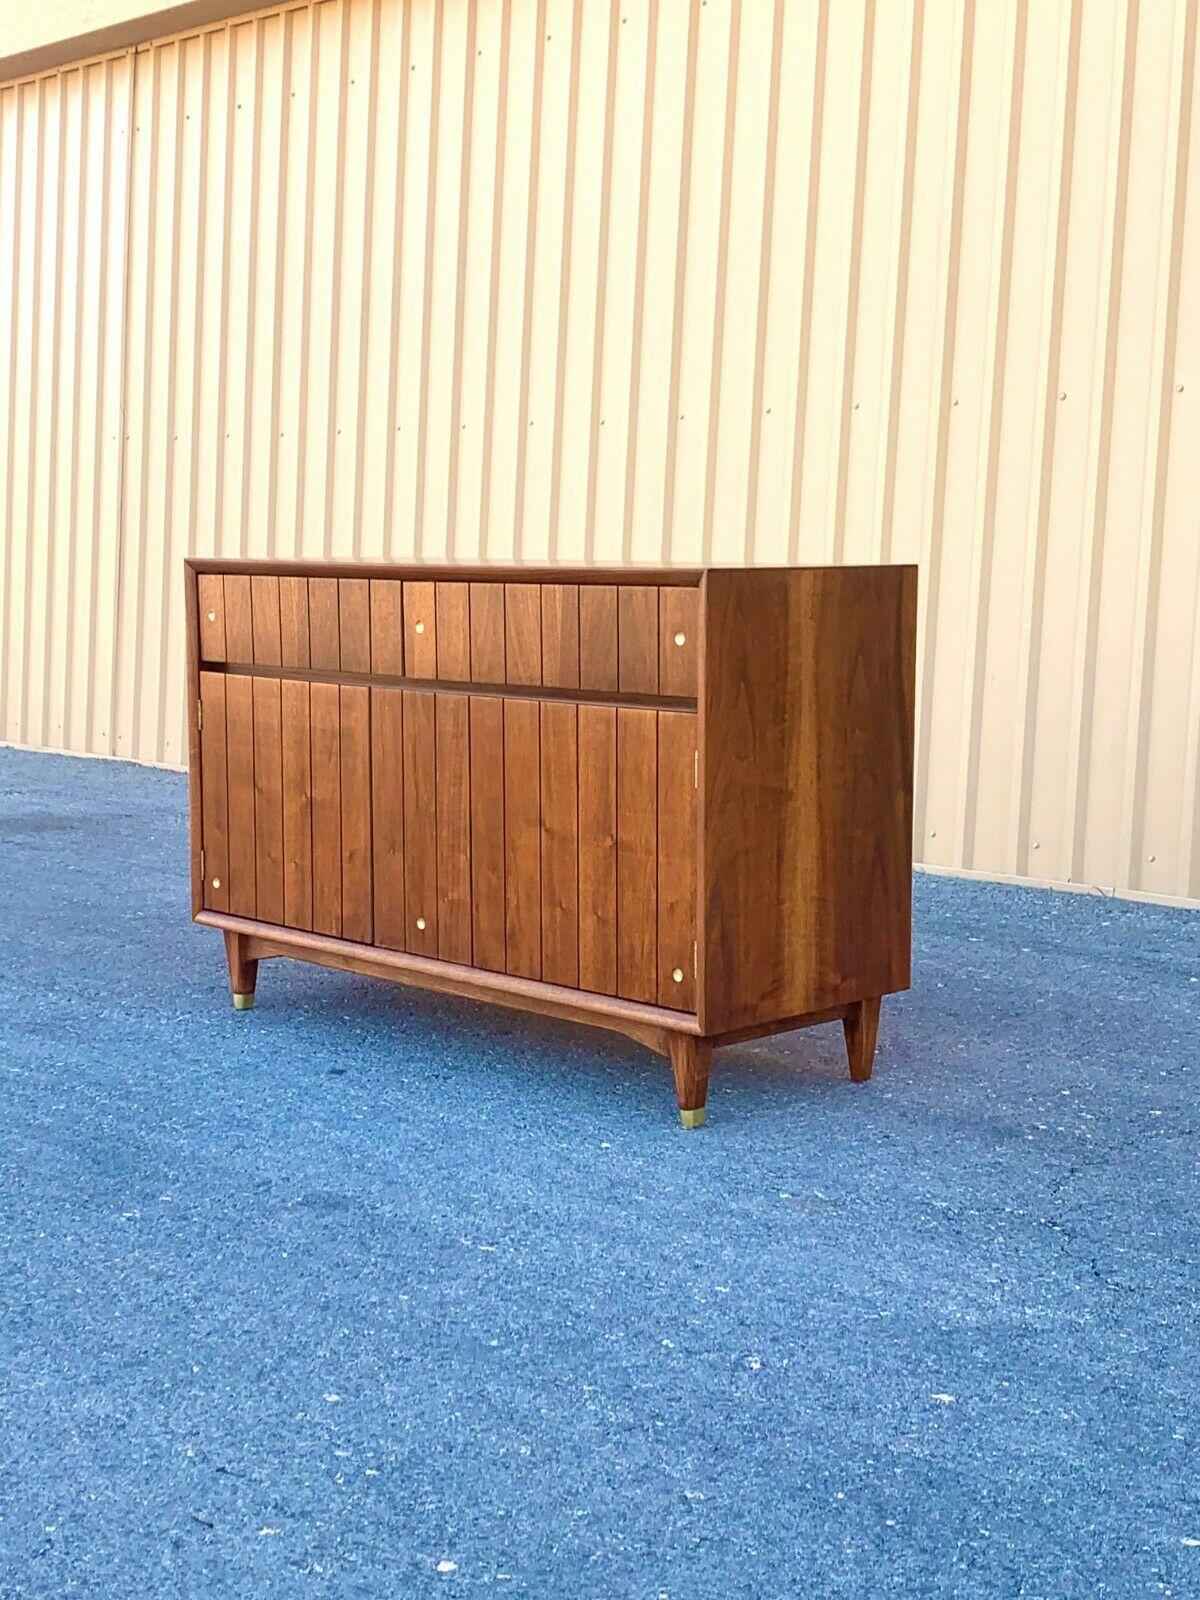 This vintage MCM credenza manufactured by Kroehler has a fixed panel in the center and two doors that open to reveal one continuous fixed shelf towards the back of the interior. Two shallow drawers lie above, one of which is compartmentalized for